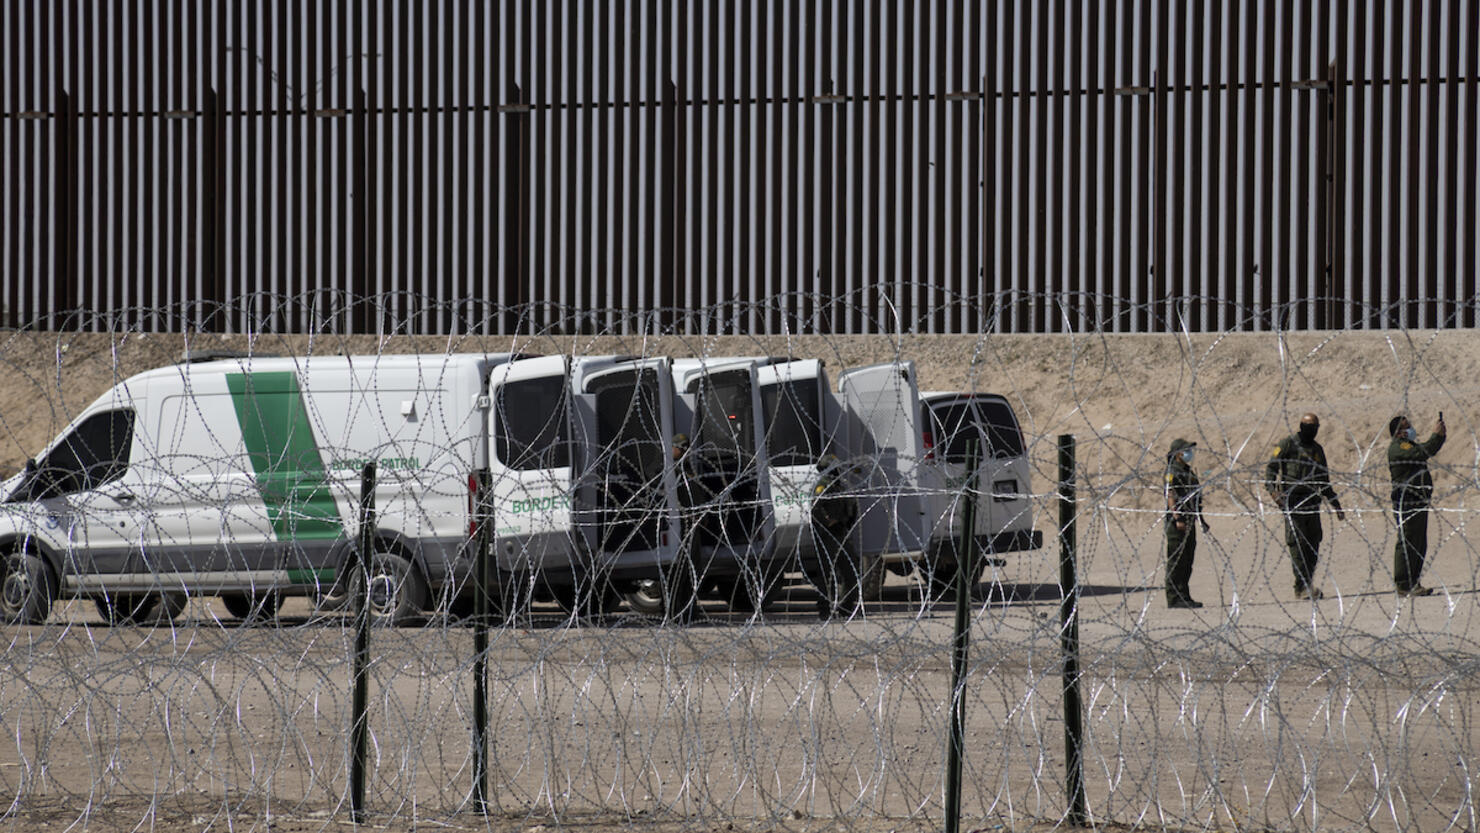 Hundreds of migrants arrive in US border to cross into the United States before Title 42 ends